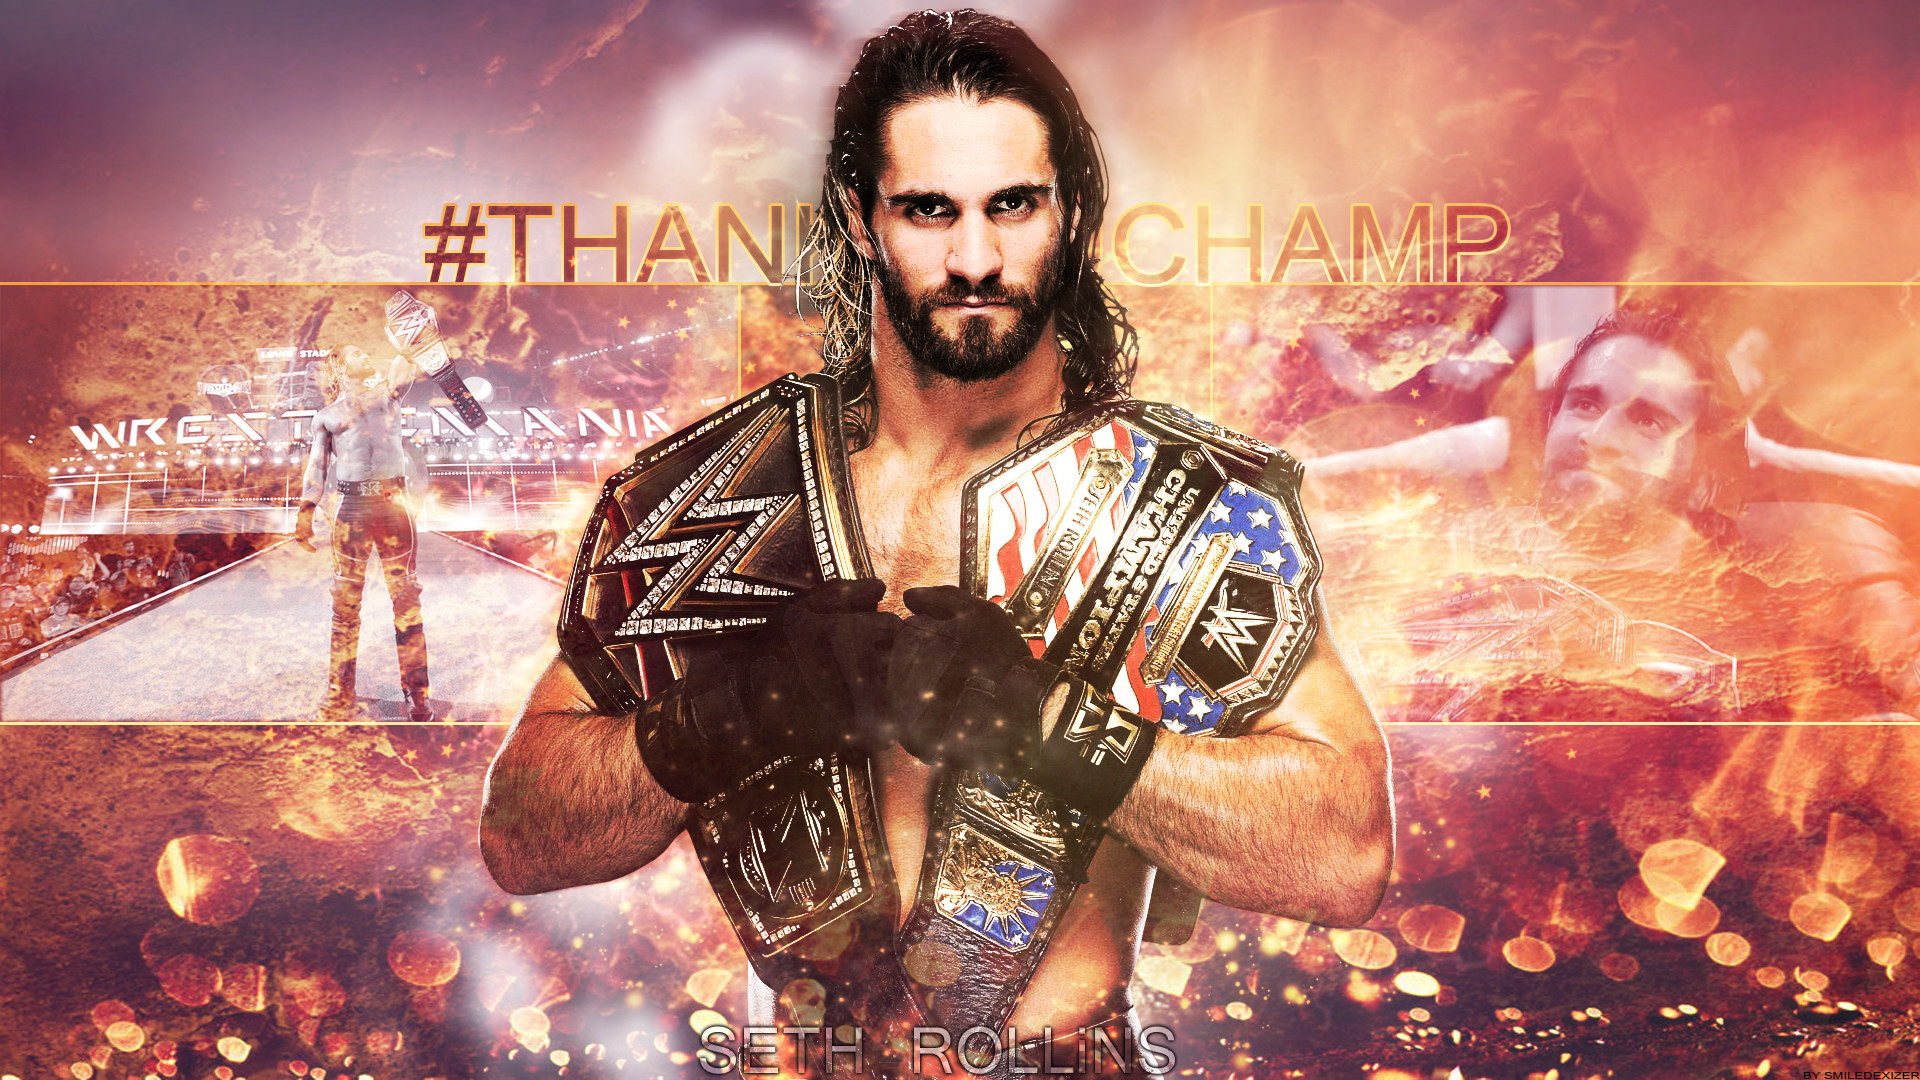 1920x1080 Seth Rollins HD Wallpapers Find best latest Seth Rollins HD Wallpapers for  your PC desktop background